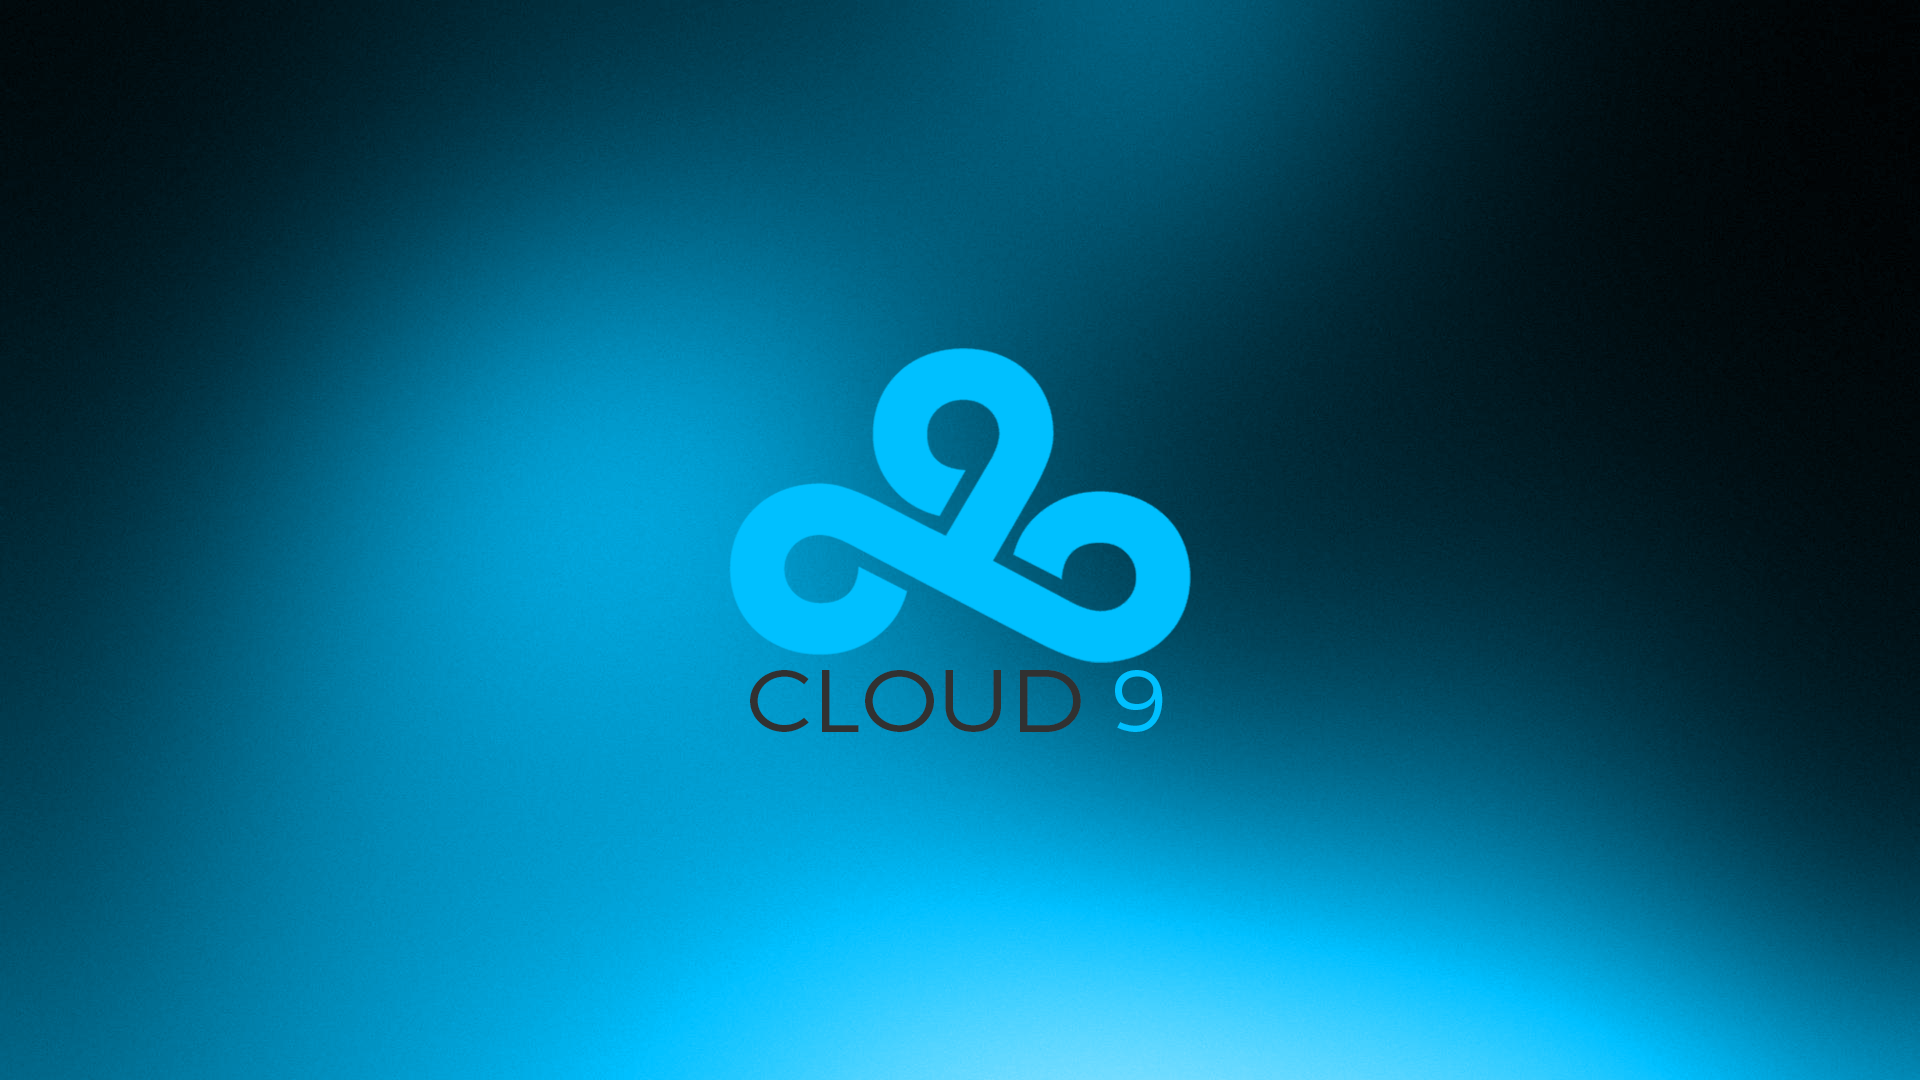 Some Cloud 9 wallpaper I made (1920x1080)